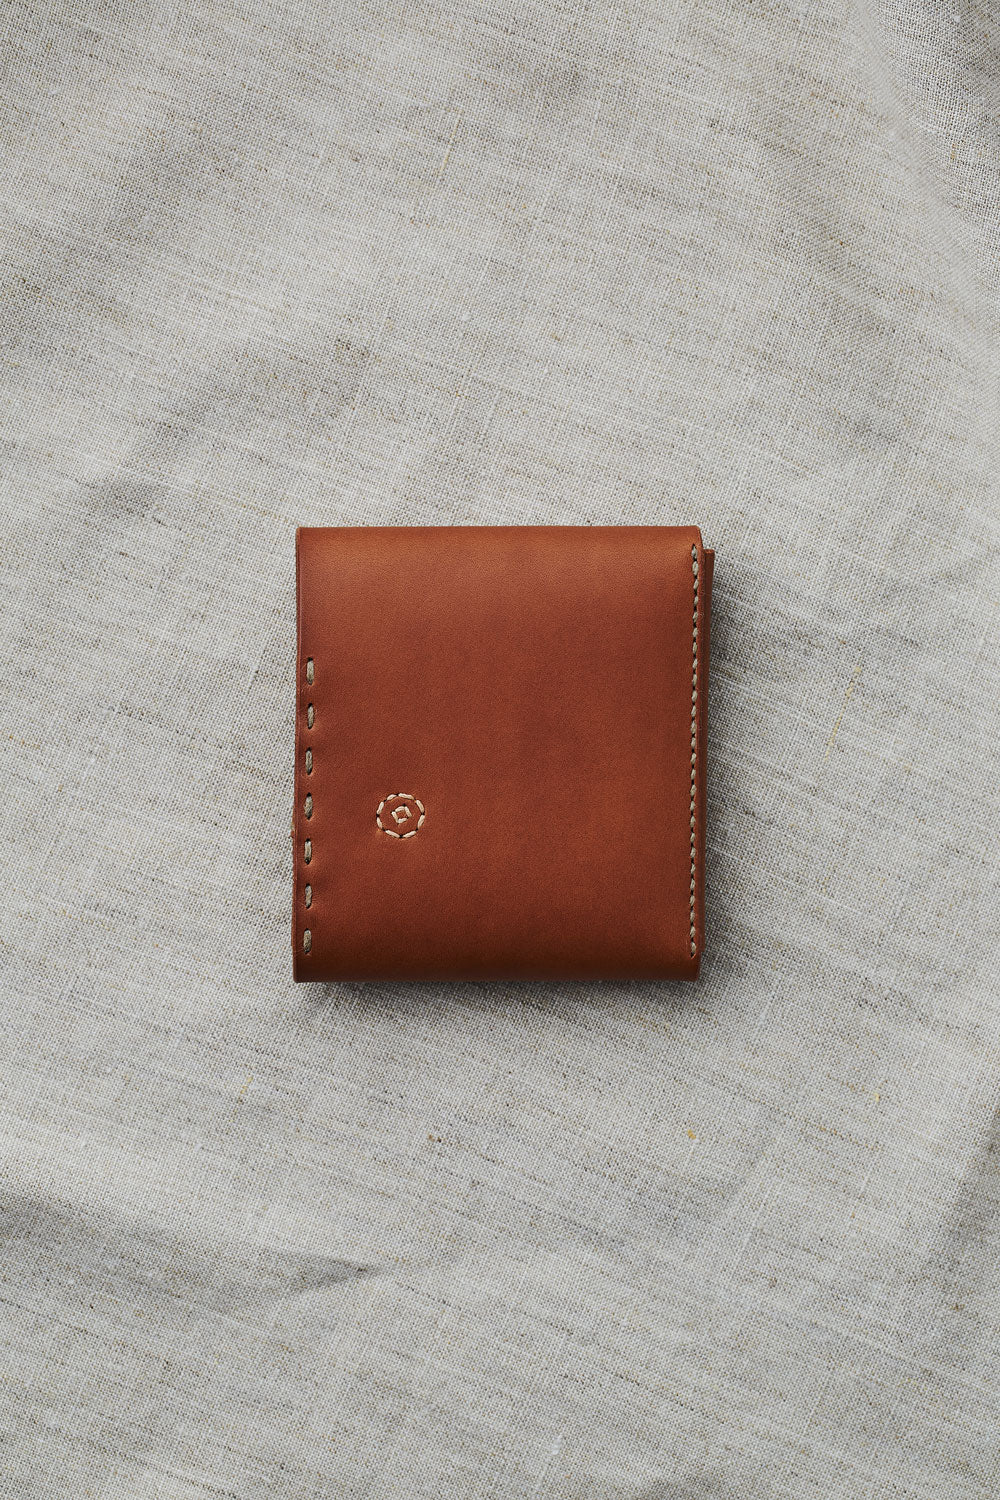 roots 根 / wallet